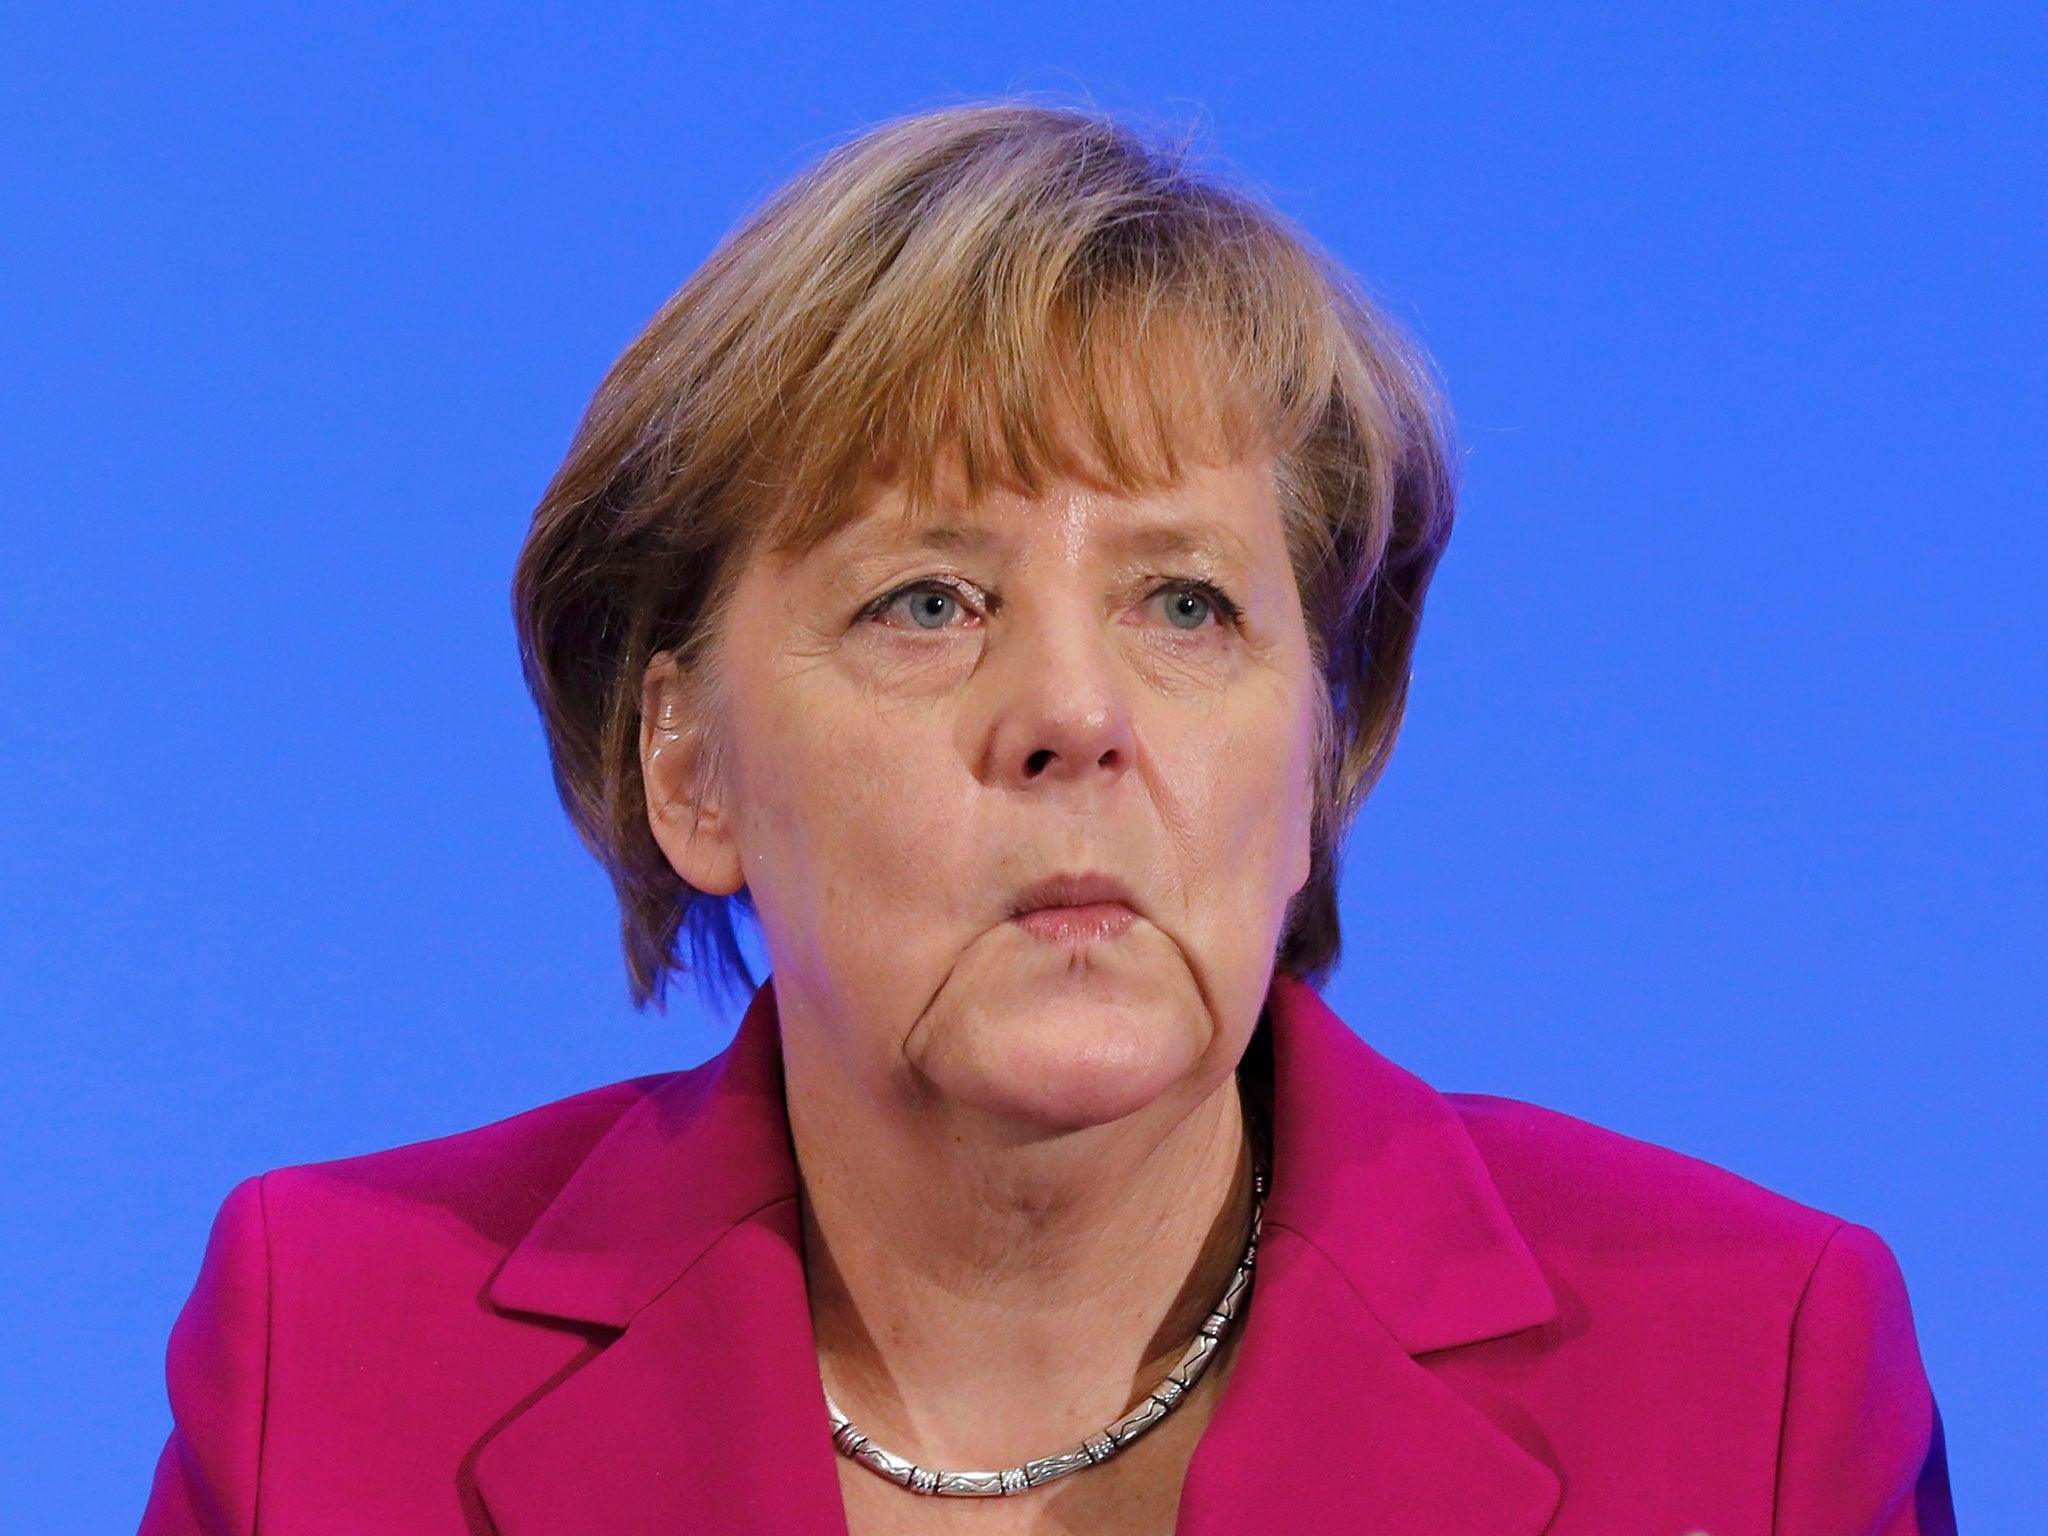 Bad news for German Chancellor Angela Merkel as fresh signs of weakness in Germany's economy appear